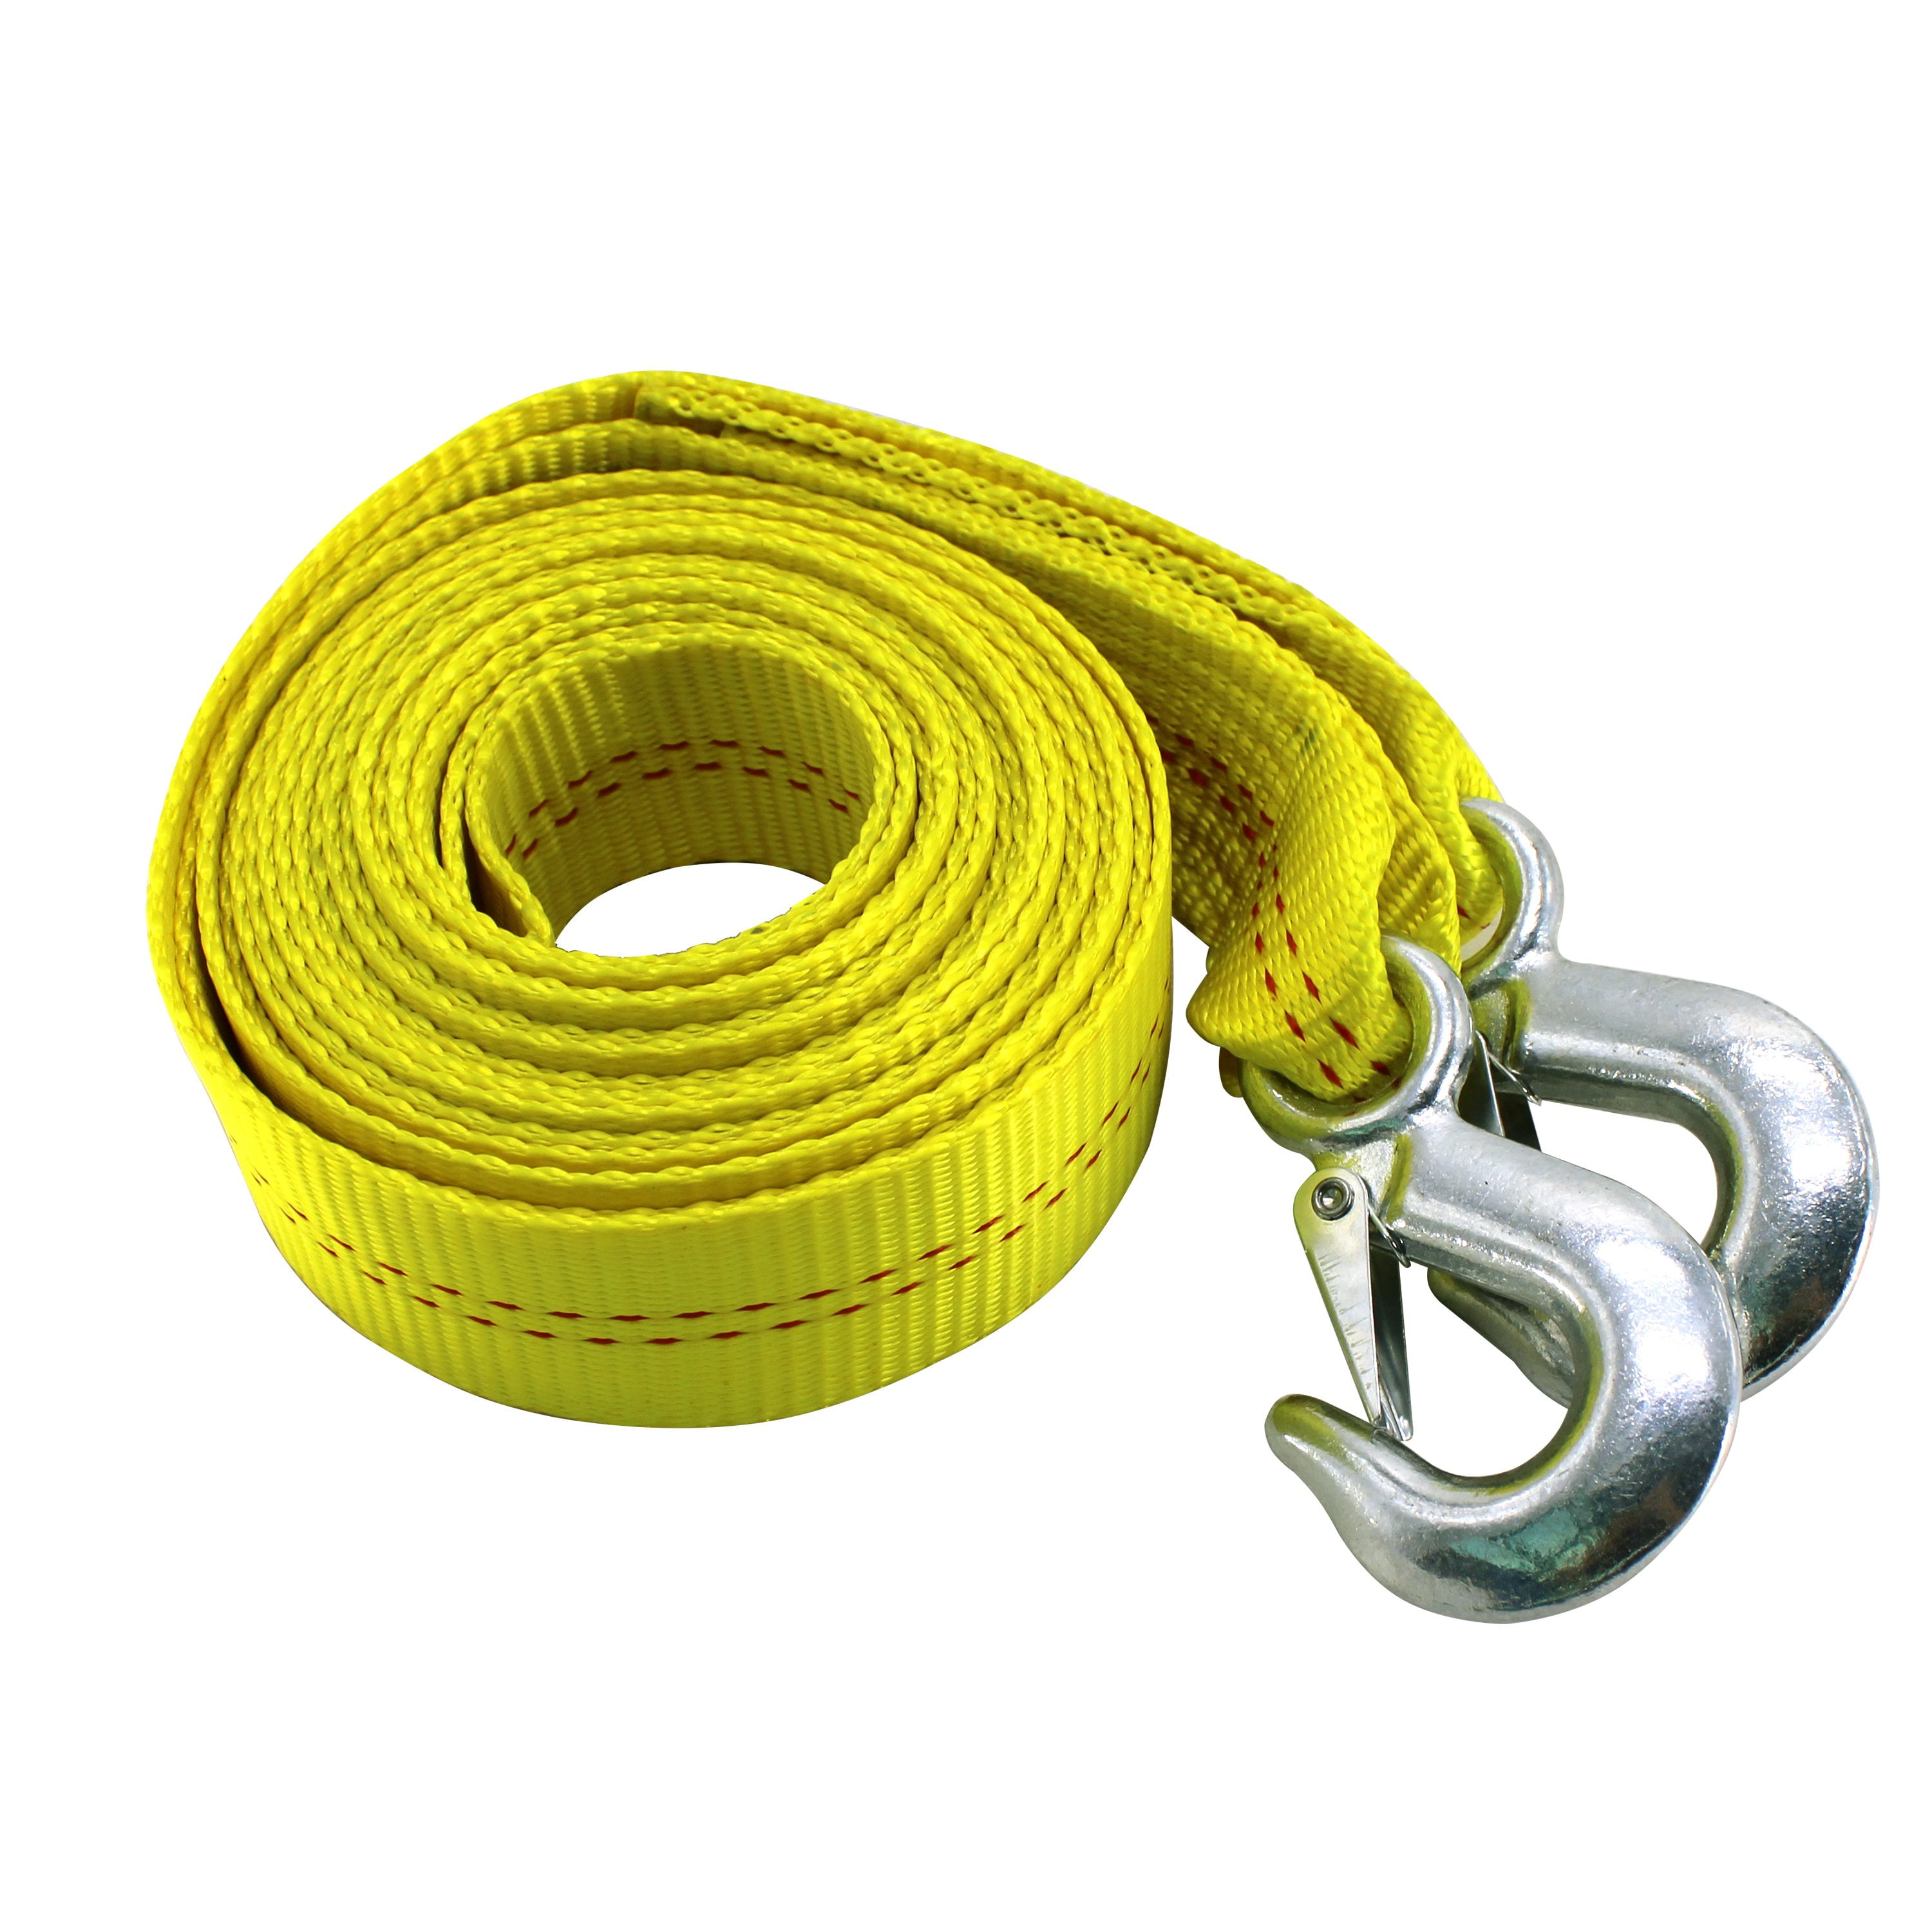 Tow Strap with Hooks,2”X20' Heavy Duty Tow Rope for Vehicles,Car Tow R –  Durrett Transports and Treasures LLC